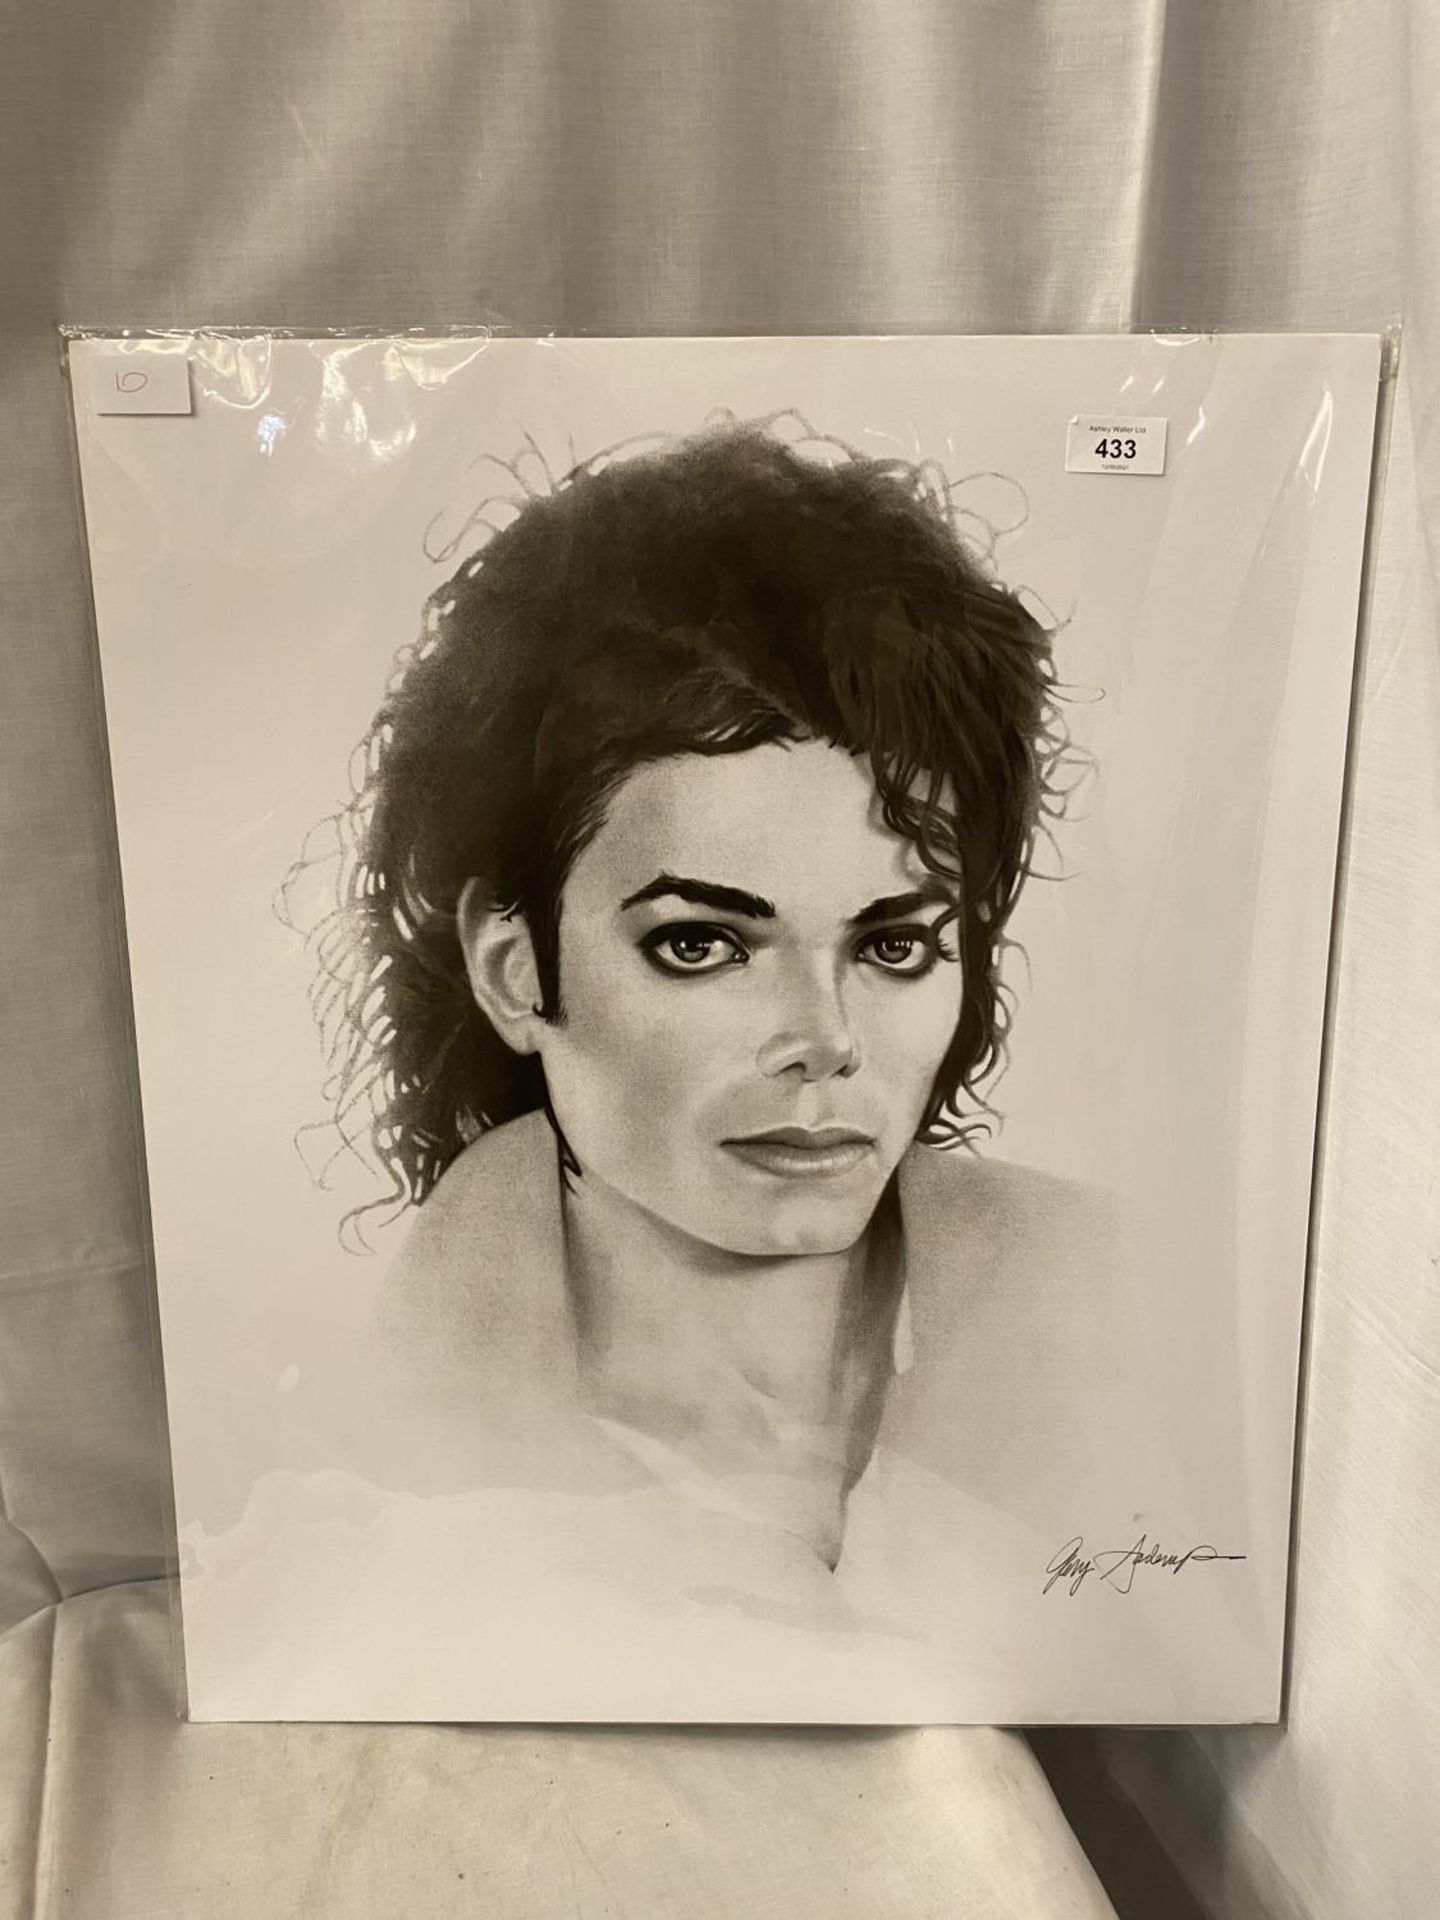 A BLACK AND WHITE SKETCH STYLE PICTURE OF MICHAEL JACKSON